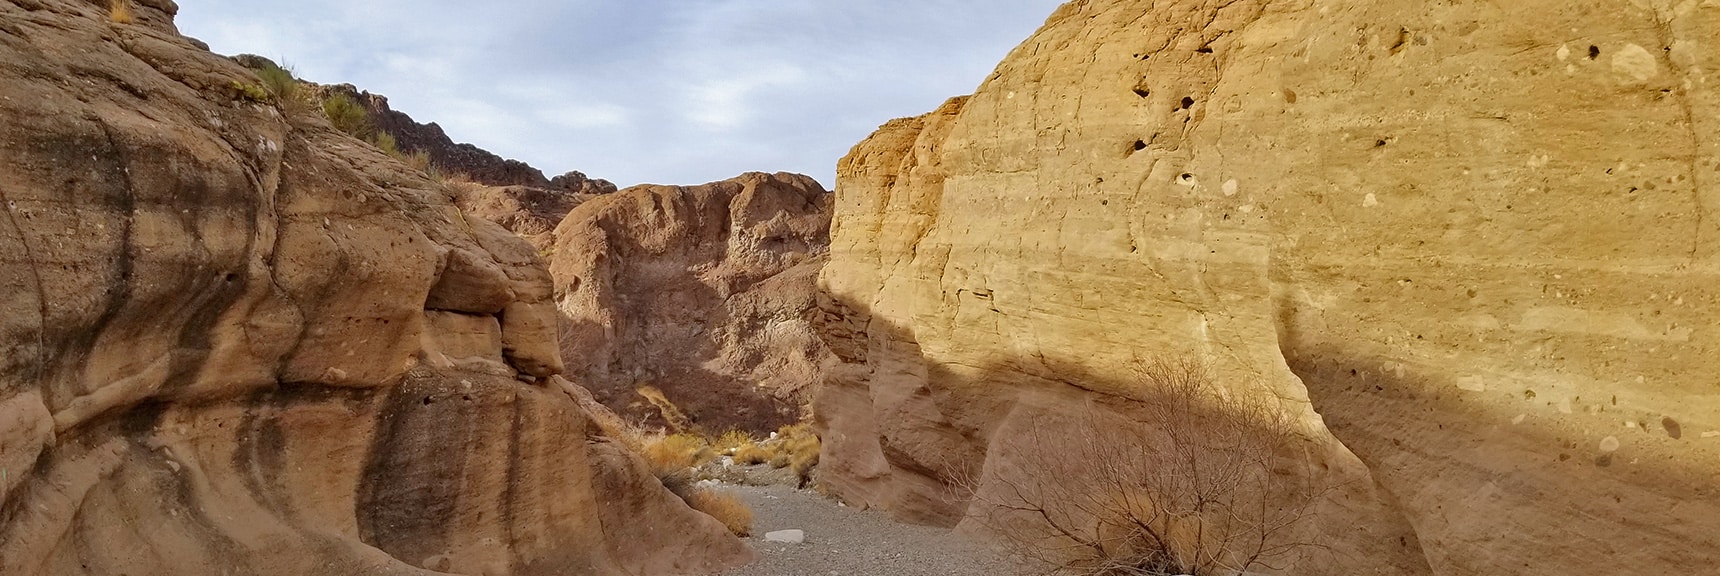 Continuing Down White Rock Canyon Toward Liberty Bell Arch Trail | Arizona Hot Spring | Liberty Bell Arch | Lake Mead National Recreation Area, Arizona